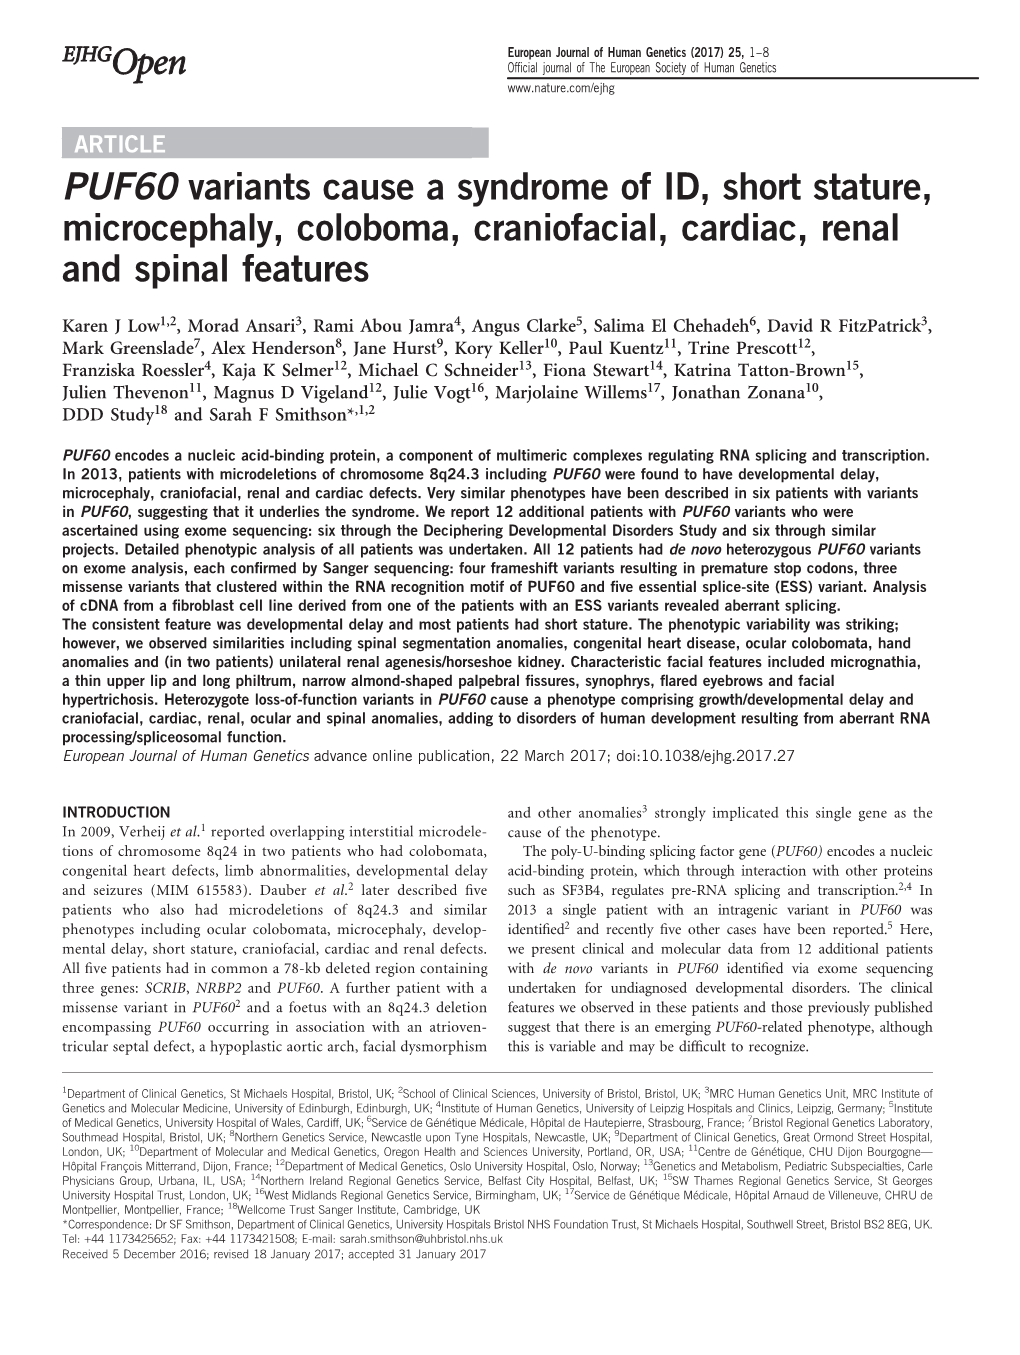 PUF60 Variants Cause a Syndrome of ID, Short Stature, Microcephaly, Coloboma, Craniofacial, Cardiac, Renal and Spinal Features